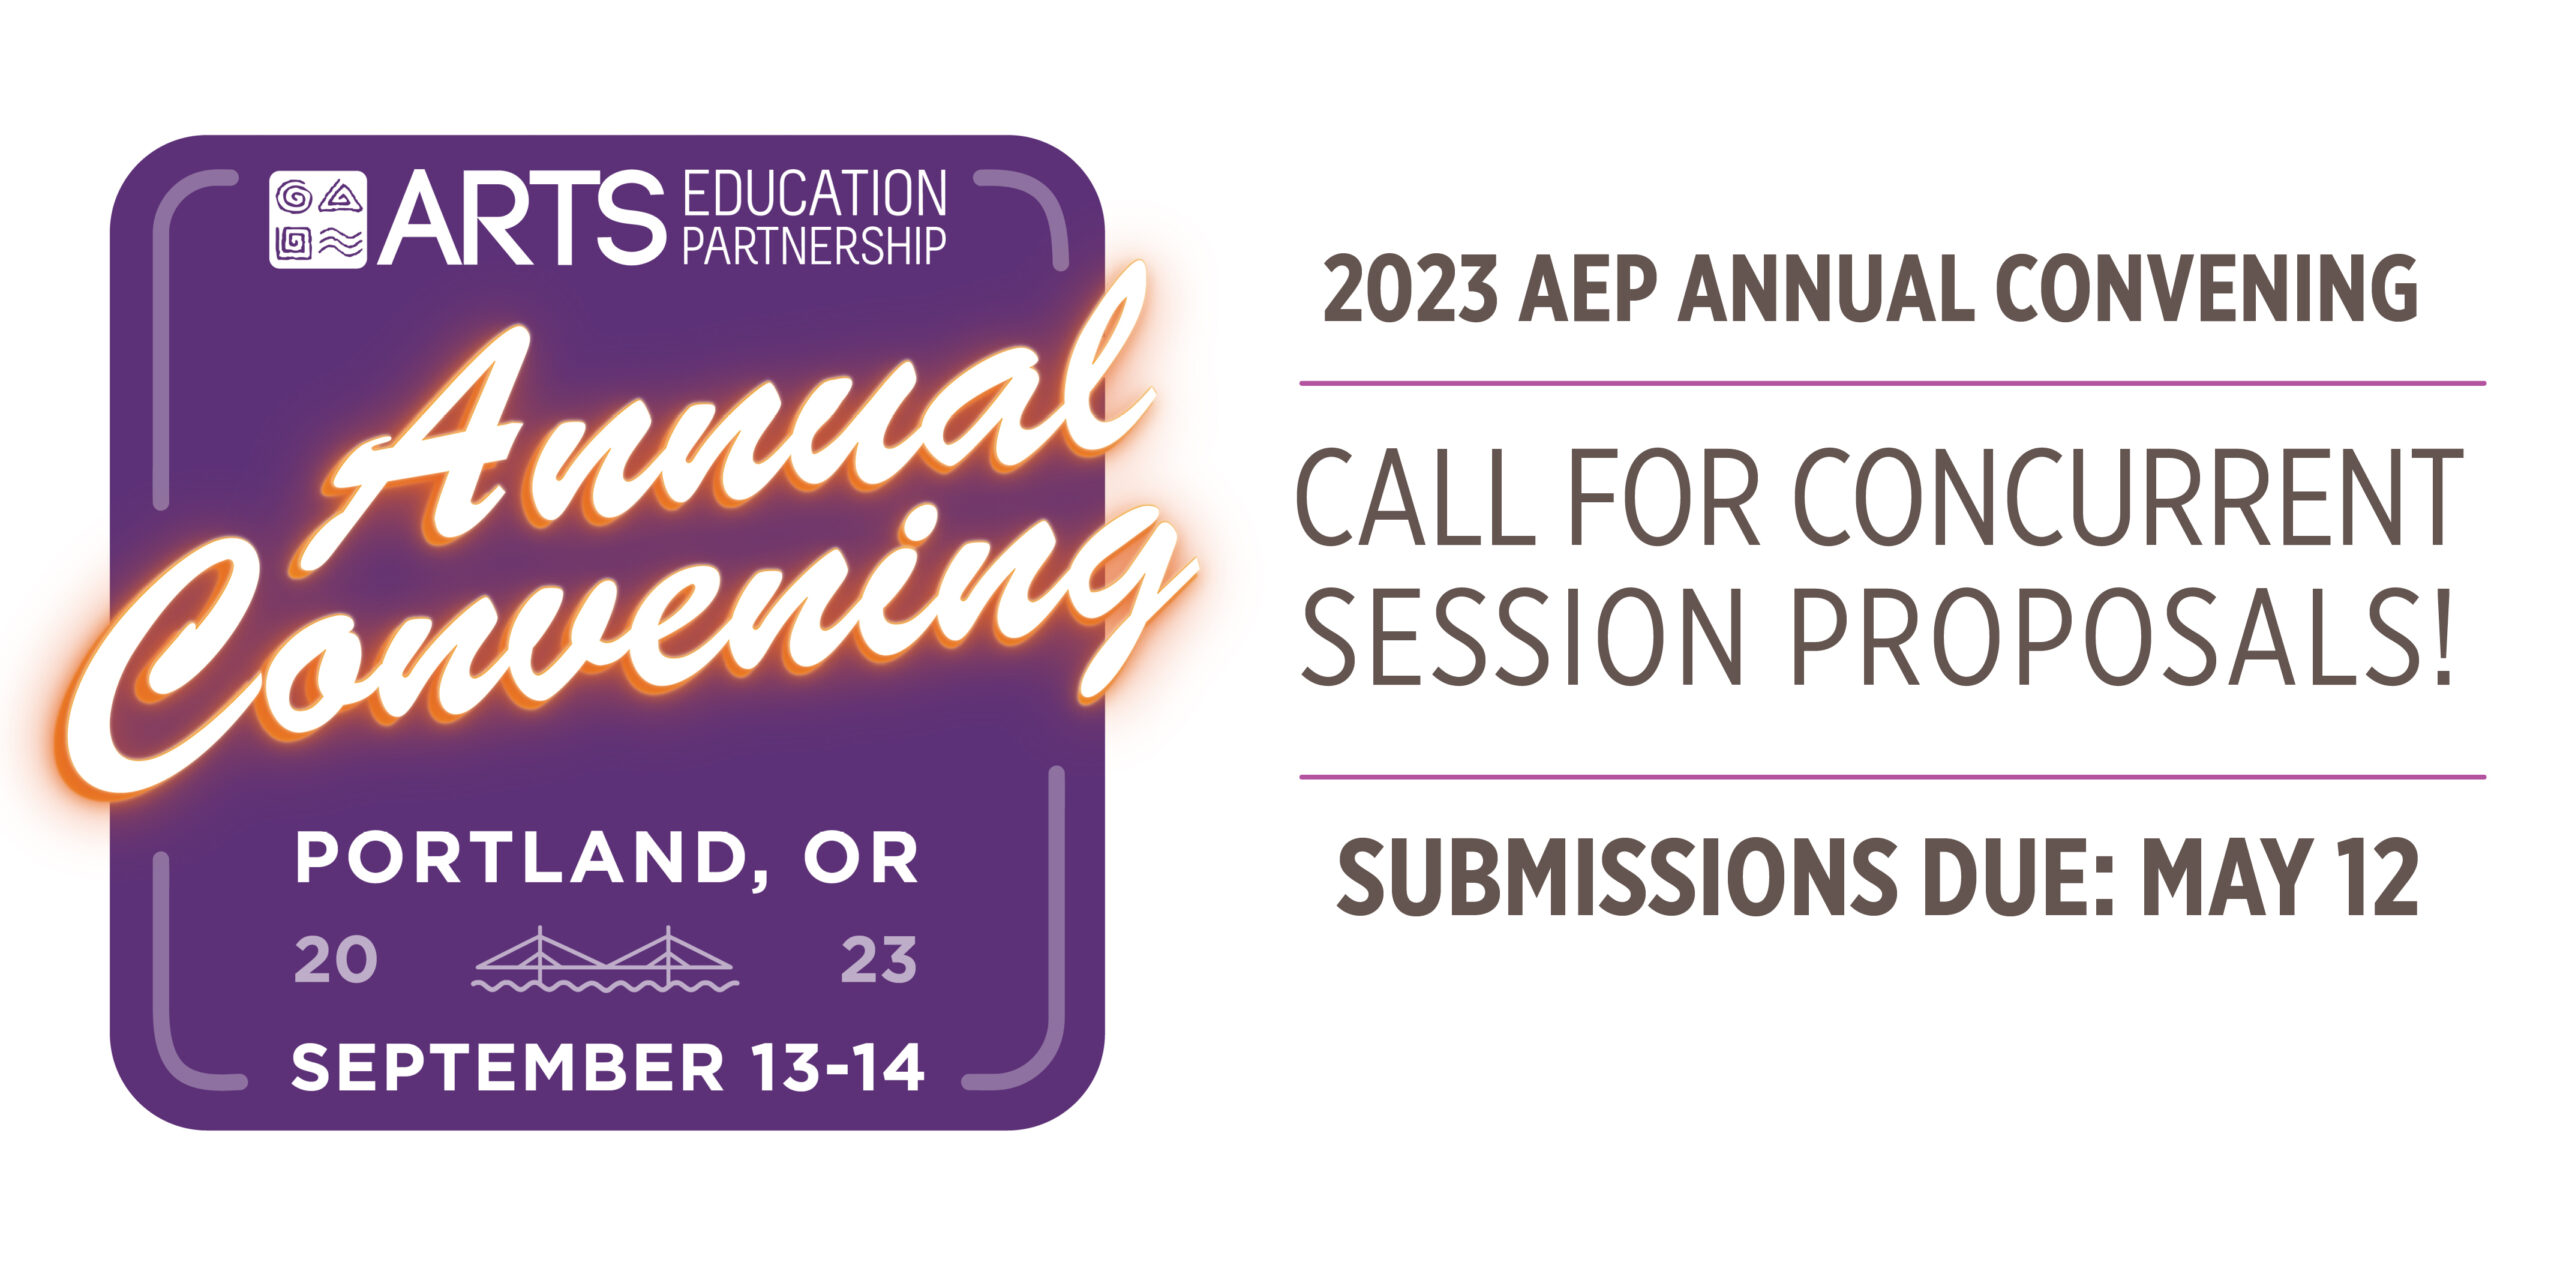 2023 AEP Annual Convening, Call for Concurrent Session Proposals! Submissions due May 12.